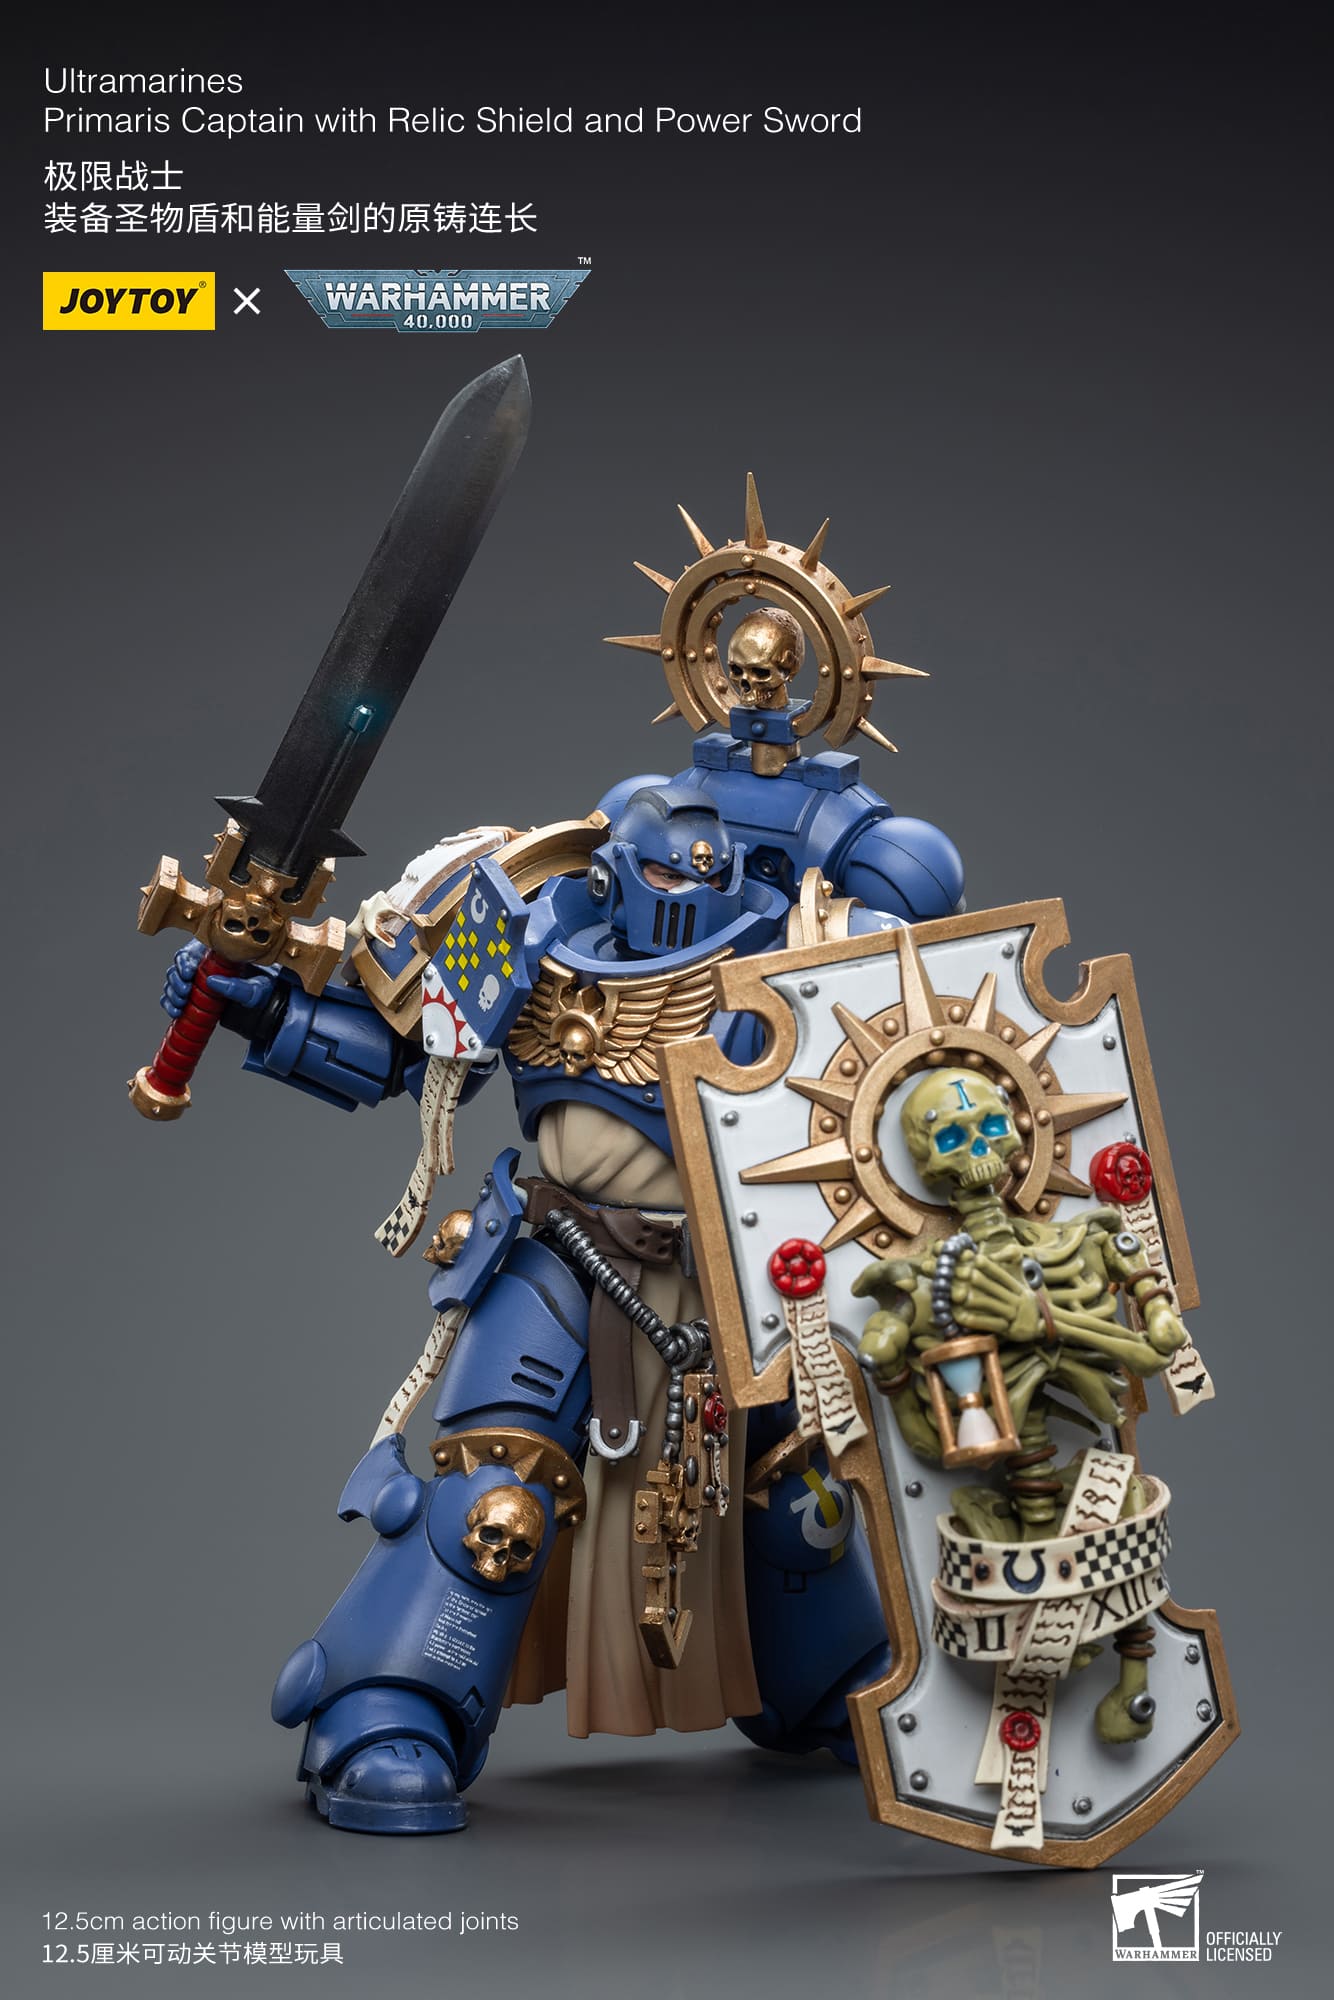 SPARES/REPAIRS Warhammer 40k: Ultramarines: Primaris Captain With Relic Shield And Power Sword SPARES/REPAIRS: Joy Toy